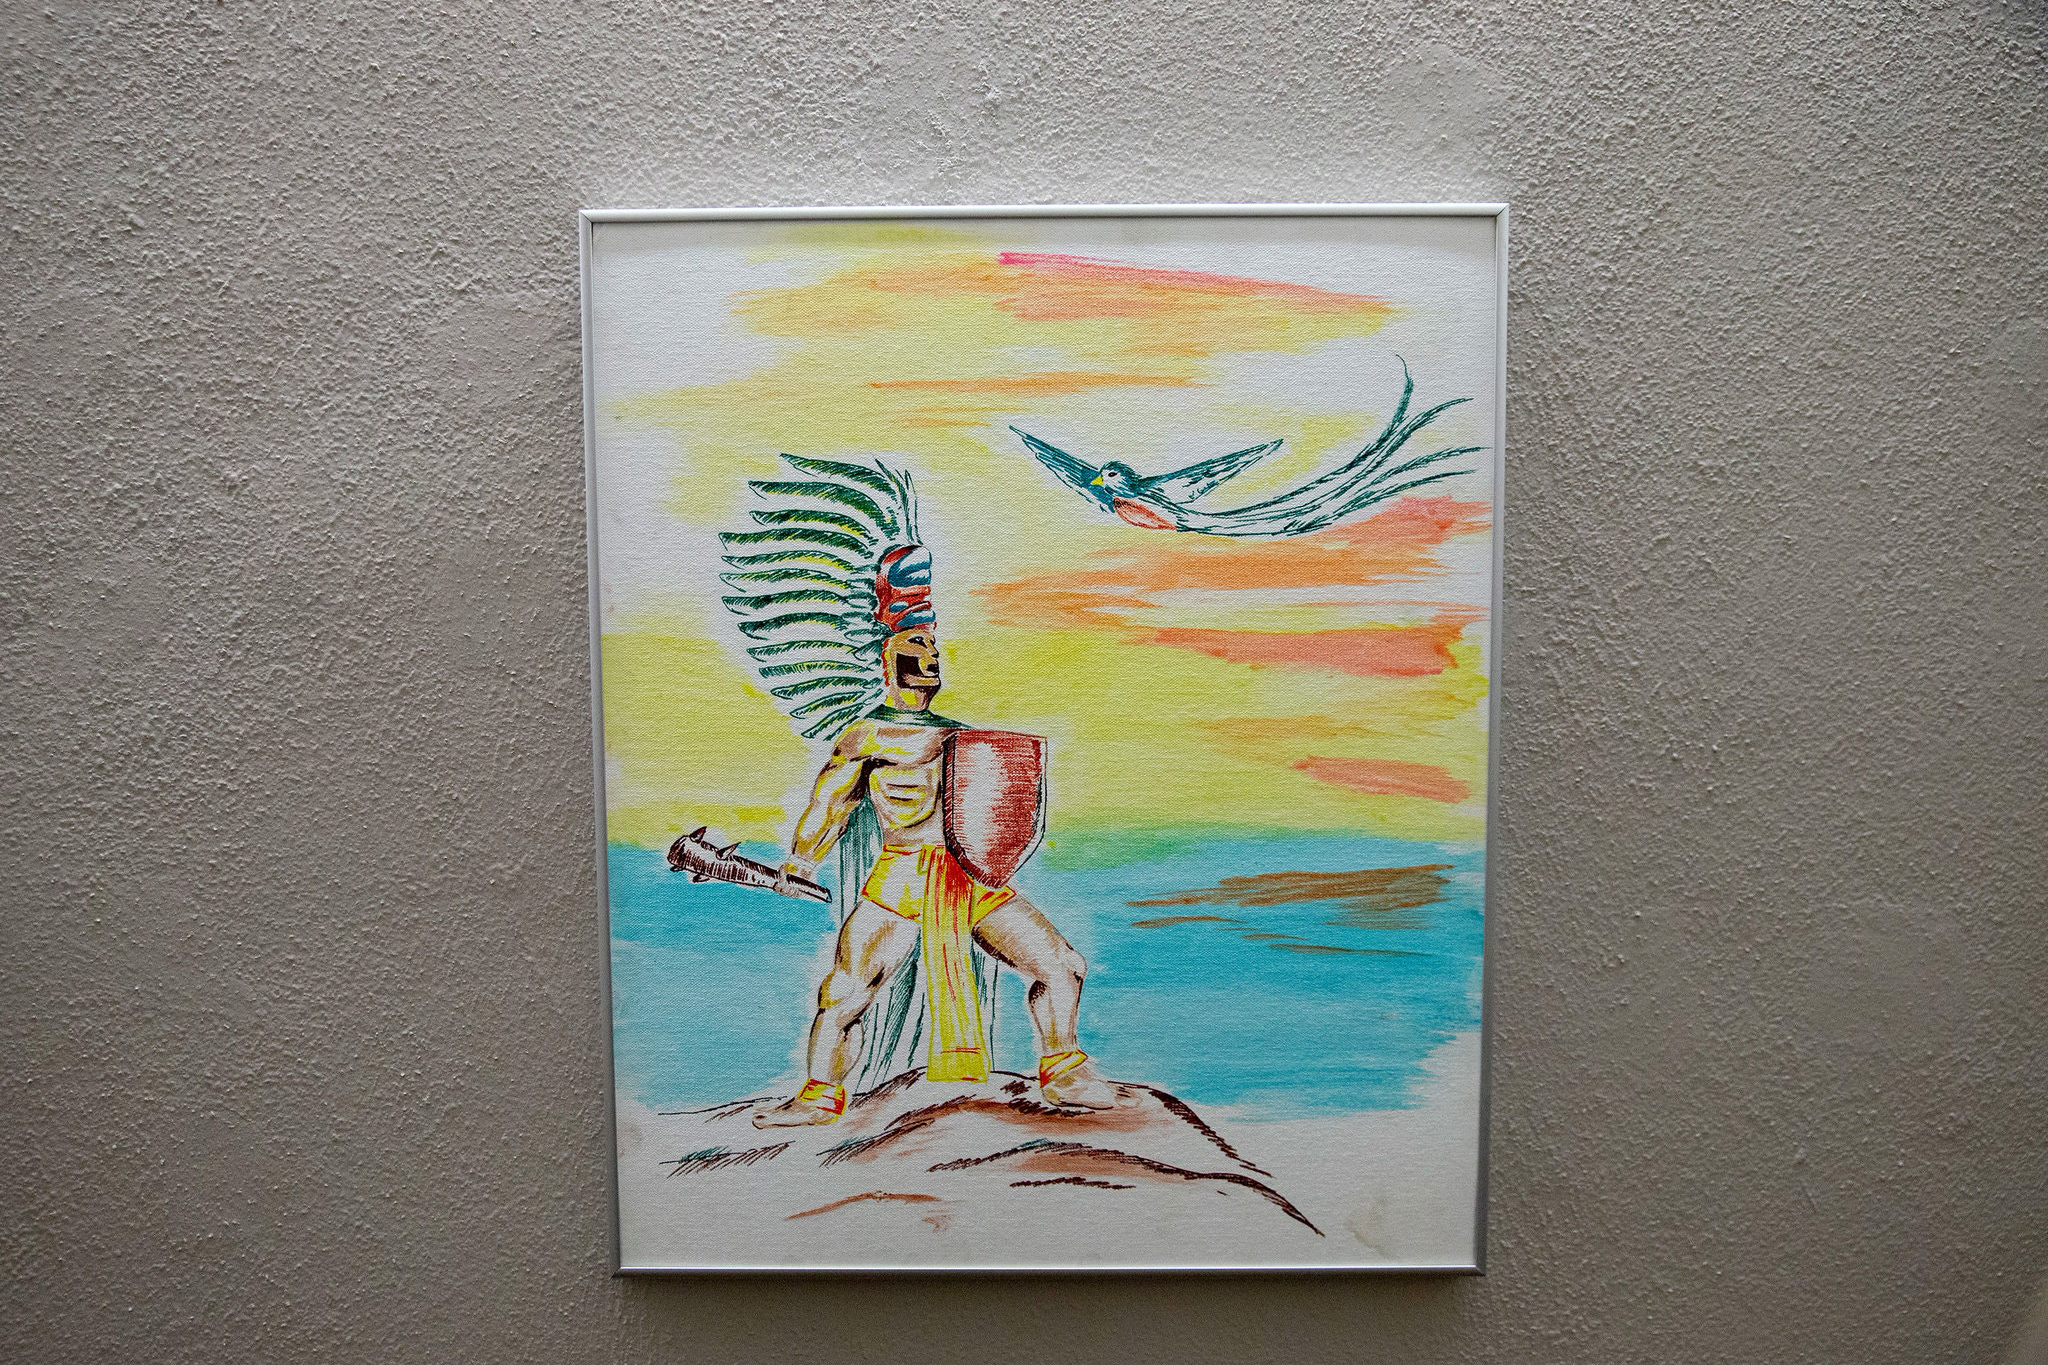 Immigrant children held at Tornillo created art that reminded them of their homelands. Birds were a signature motif. Photo by Ivan Pierre Aguirre